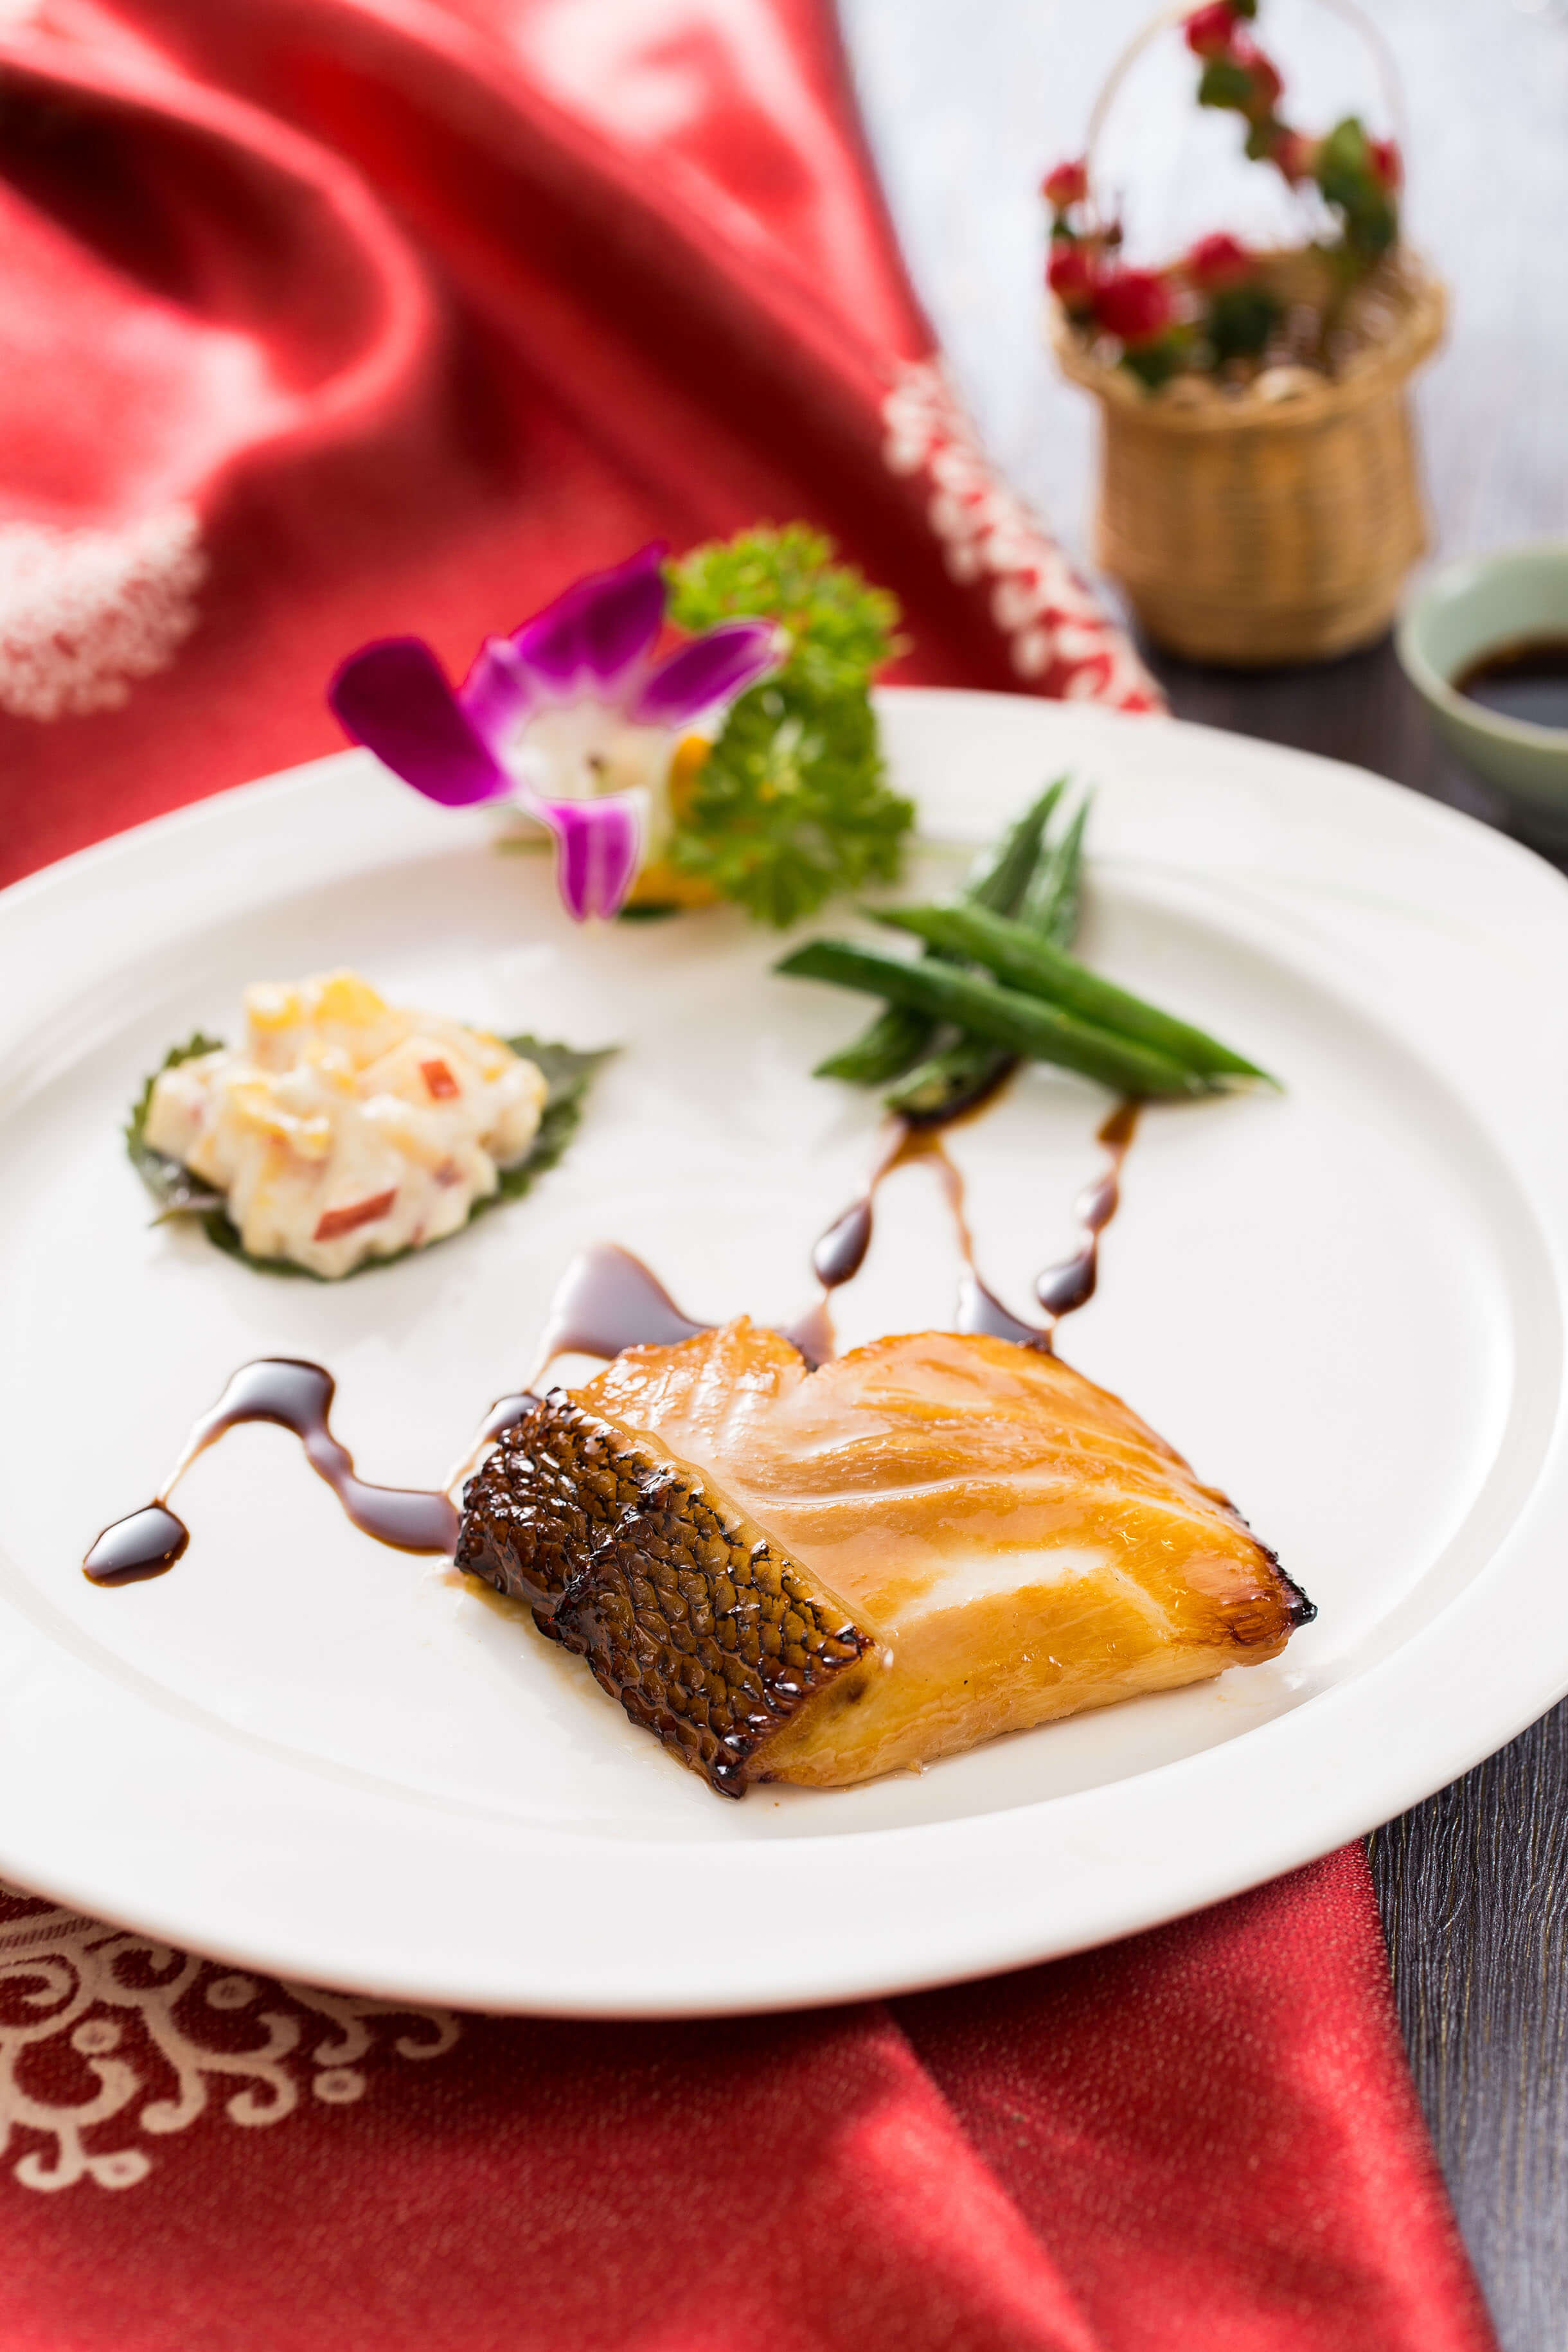 Grilled Cod Fish Fillet with Glazed Honey Sauce